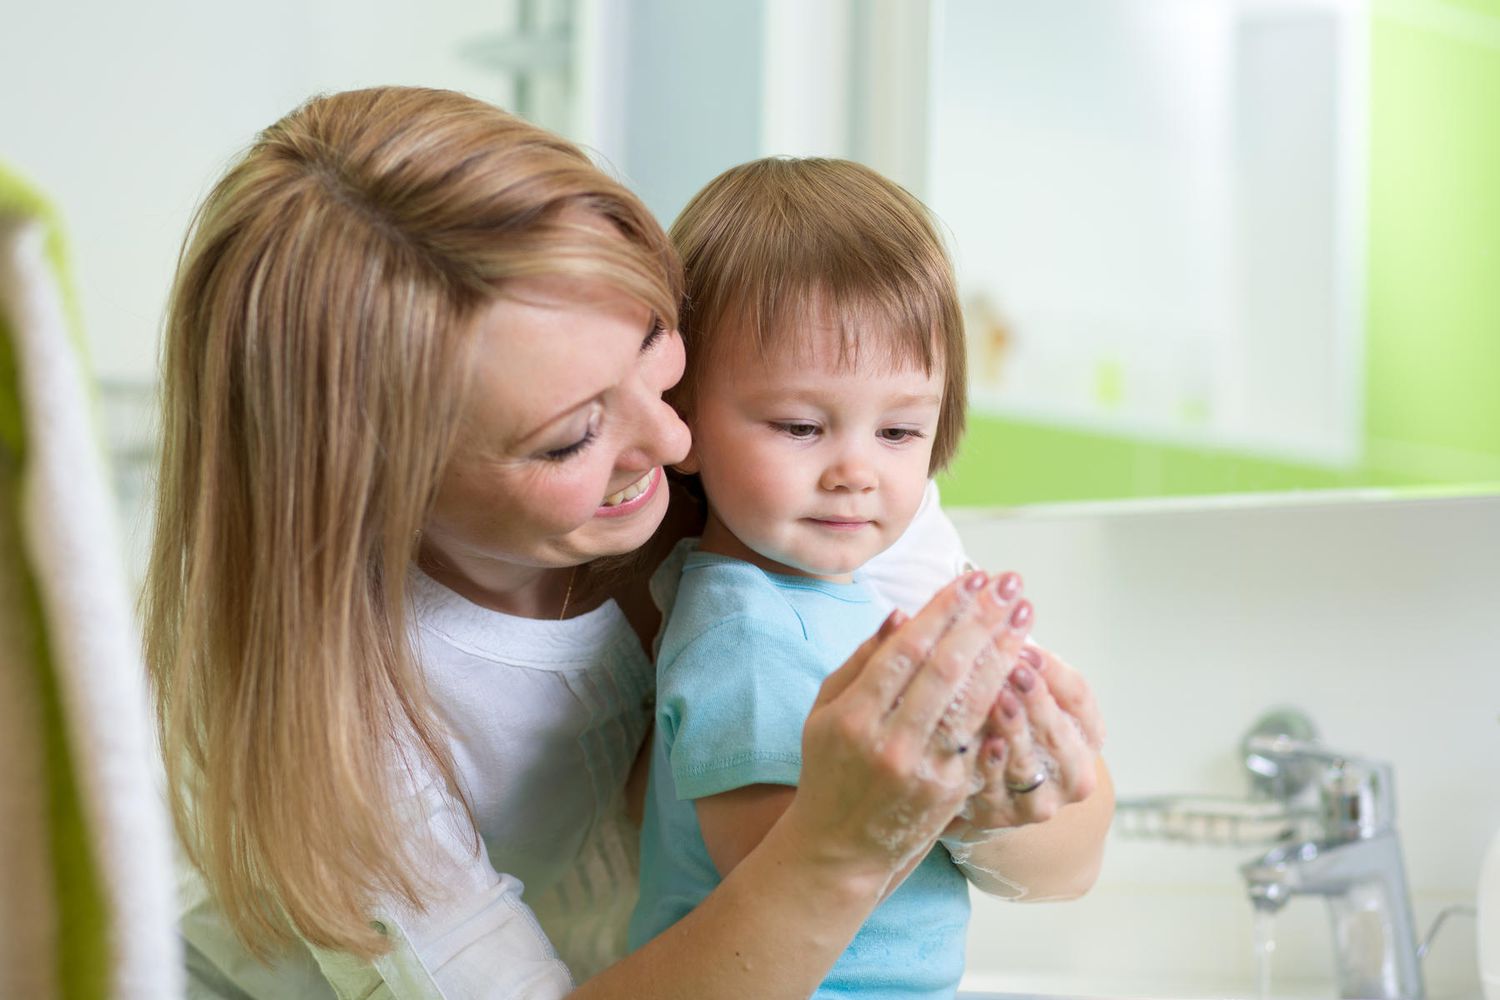 Teaching Toddlers About Hygiene Parents